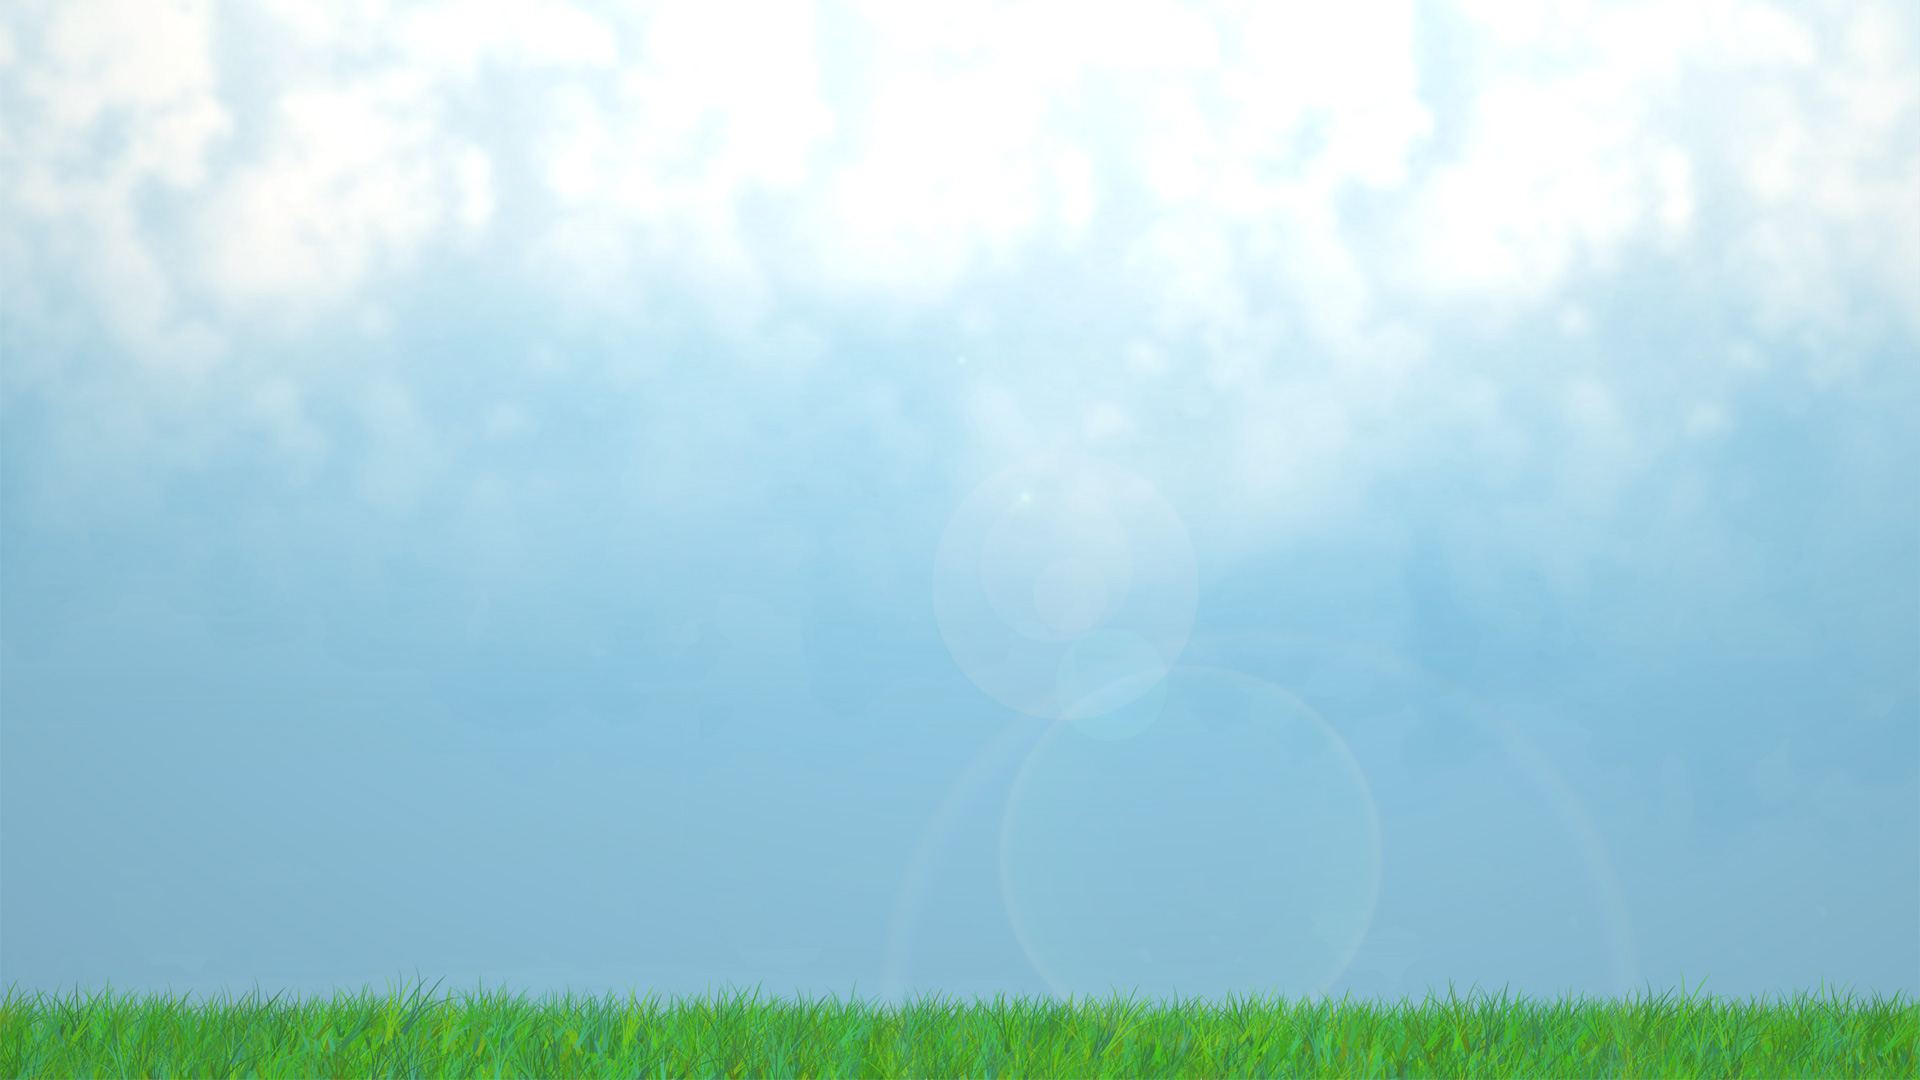 Green Grass And Blue Sky With Clouds Landscape Wallpaper Unibia